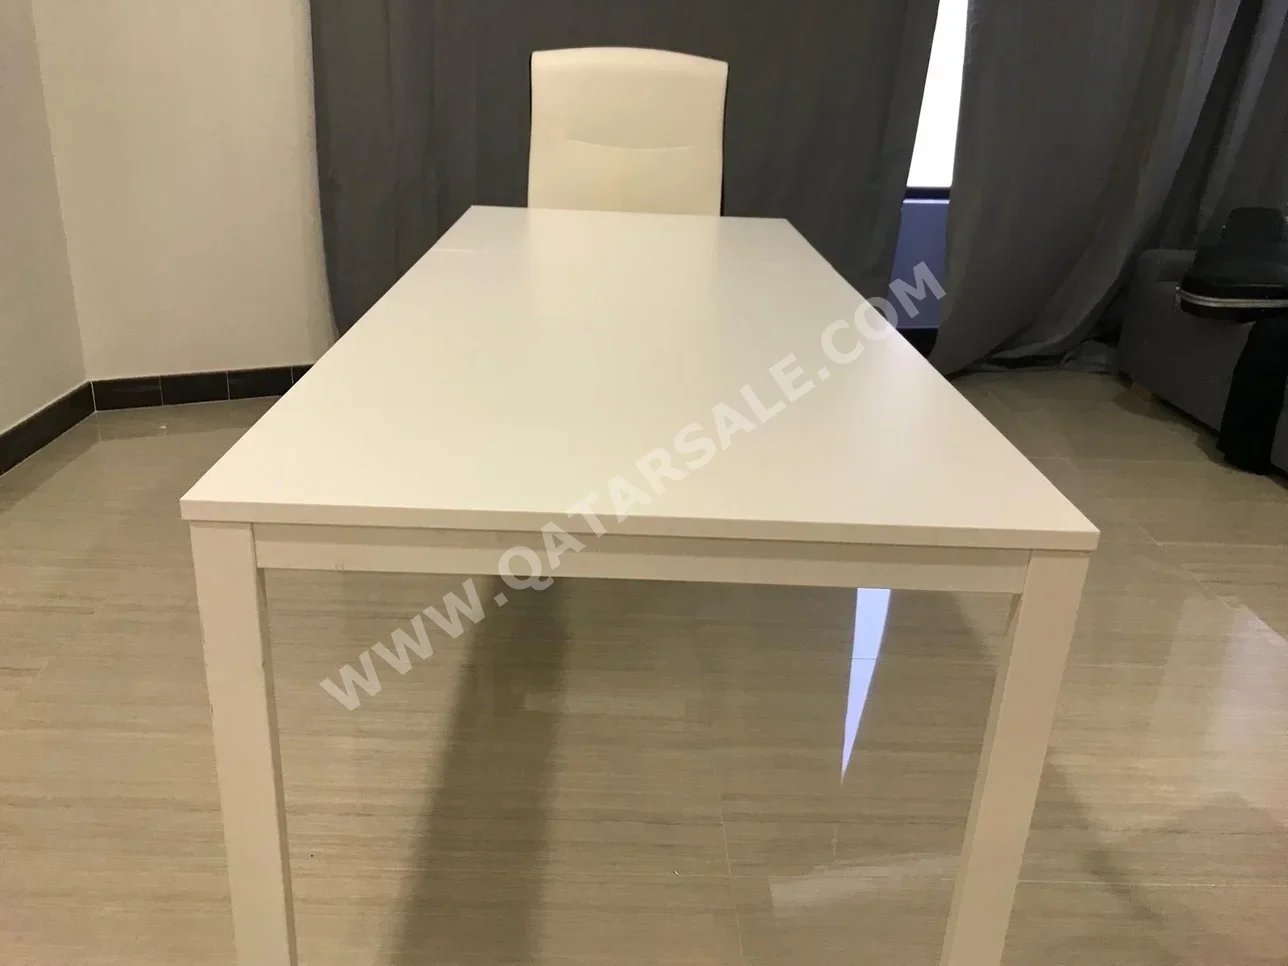 Tables & Sideboards Table & Chairs  - IKEA  - MDF  - White